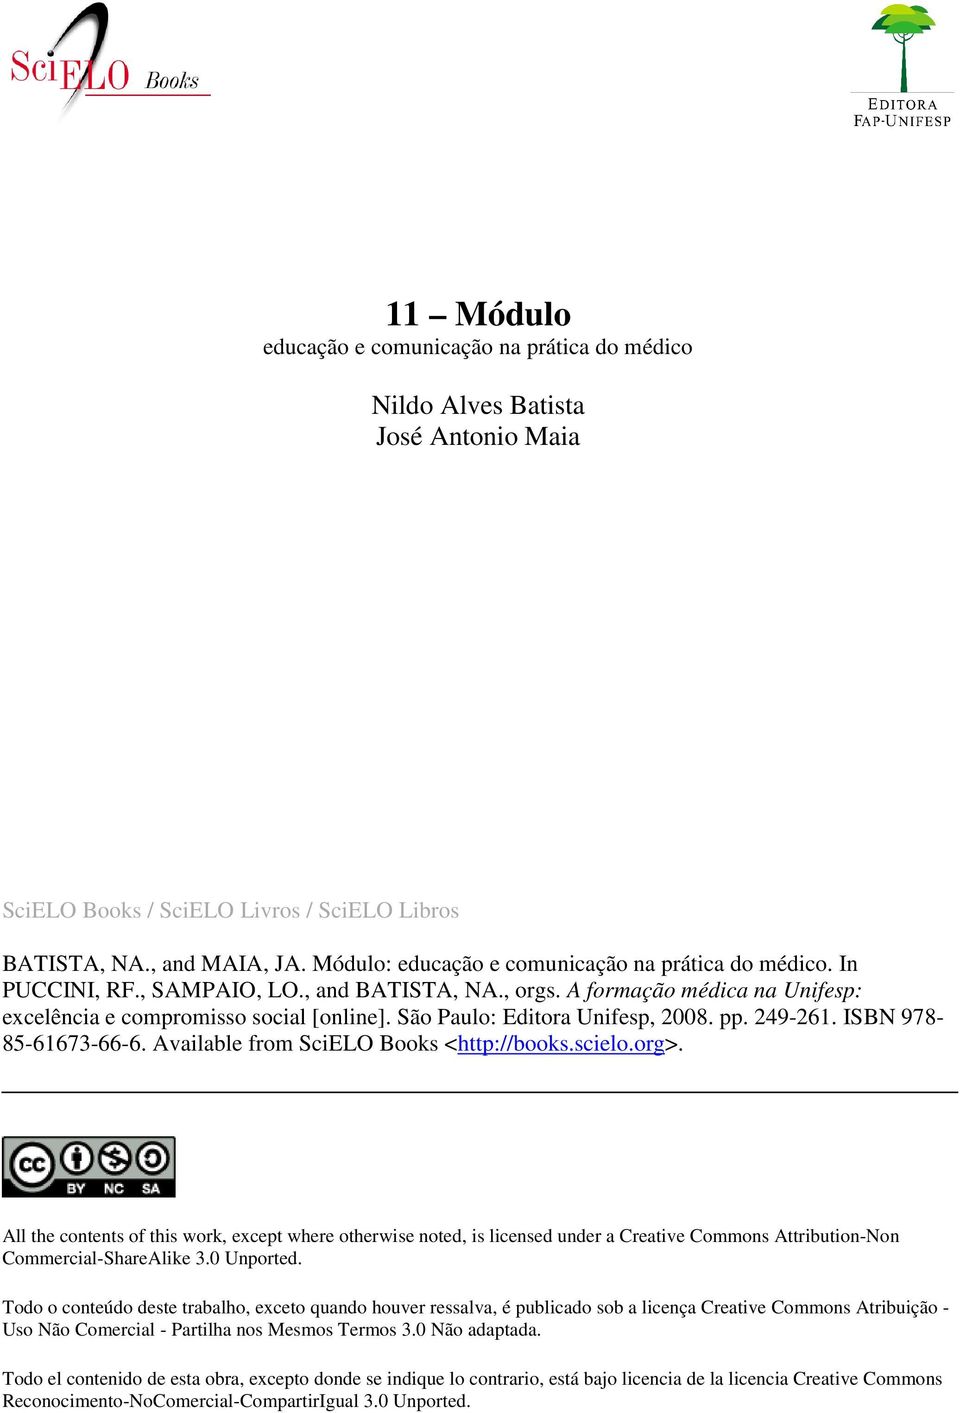 São Paulo: Editora Unifesp, 2008. pp. 249-261. ISBN 978-85-61673-66-6. Available from SciELO Books <http://books.scielo.org>.